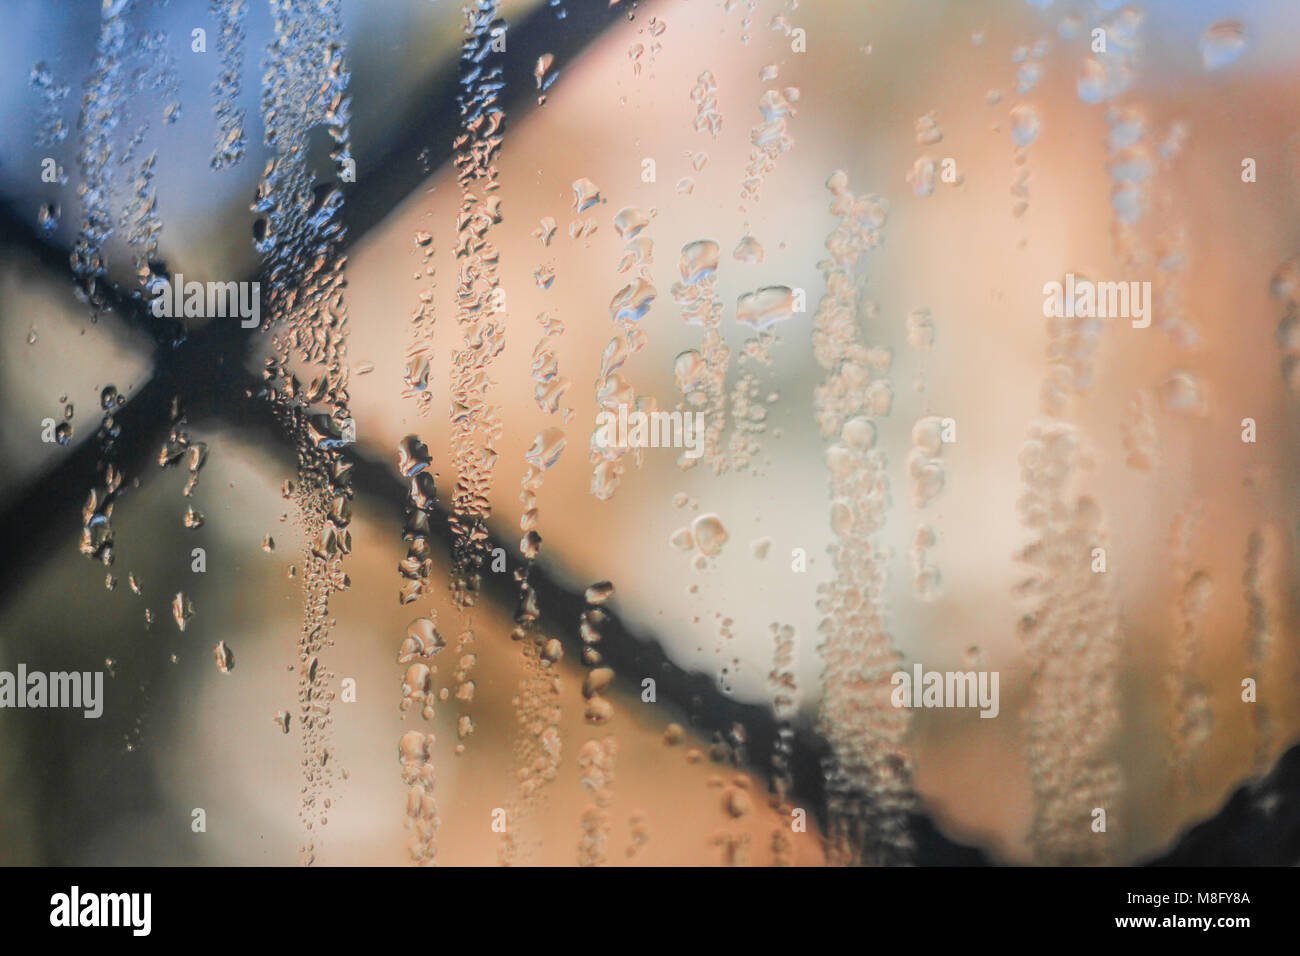 Misted glass, pink purple and golden sparkling champagne rain drops dew drops bubbles on tinted glass window on a rainy day champagne colored sparklin Stock Photo